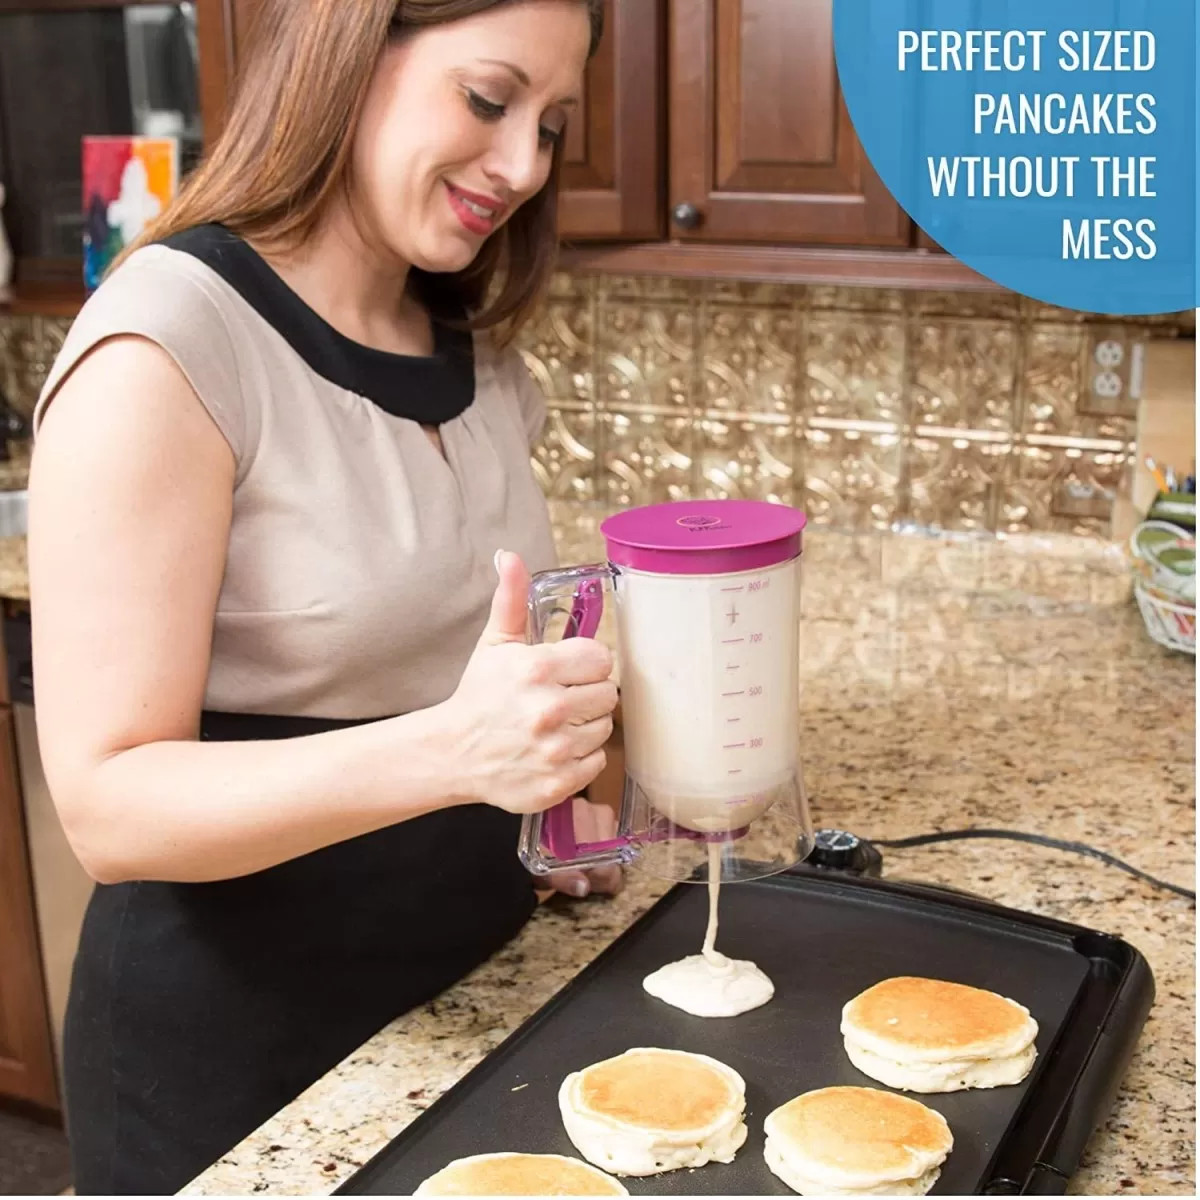 Pancake Batter Dispenser Perfect Baking Tool for Cupcake, Waffles, Muffin Mix, Cake or Any Baked Goods Bakeware Maker with Measuring Label